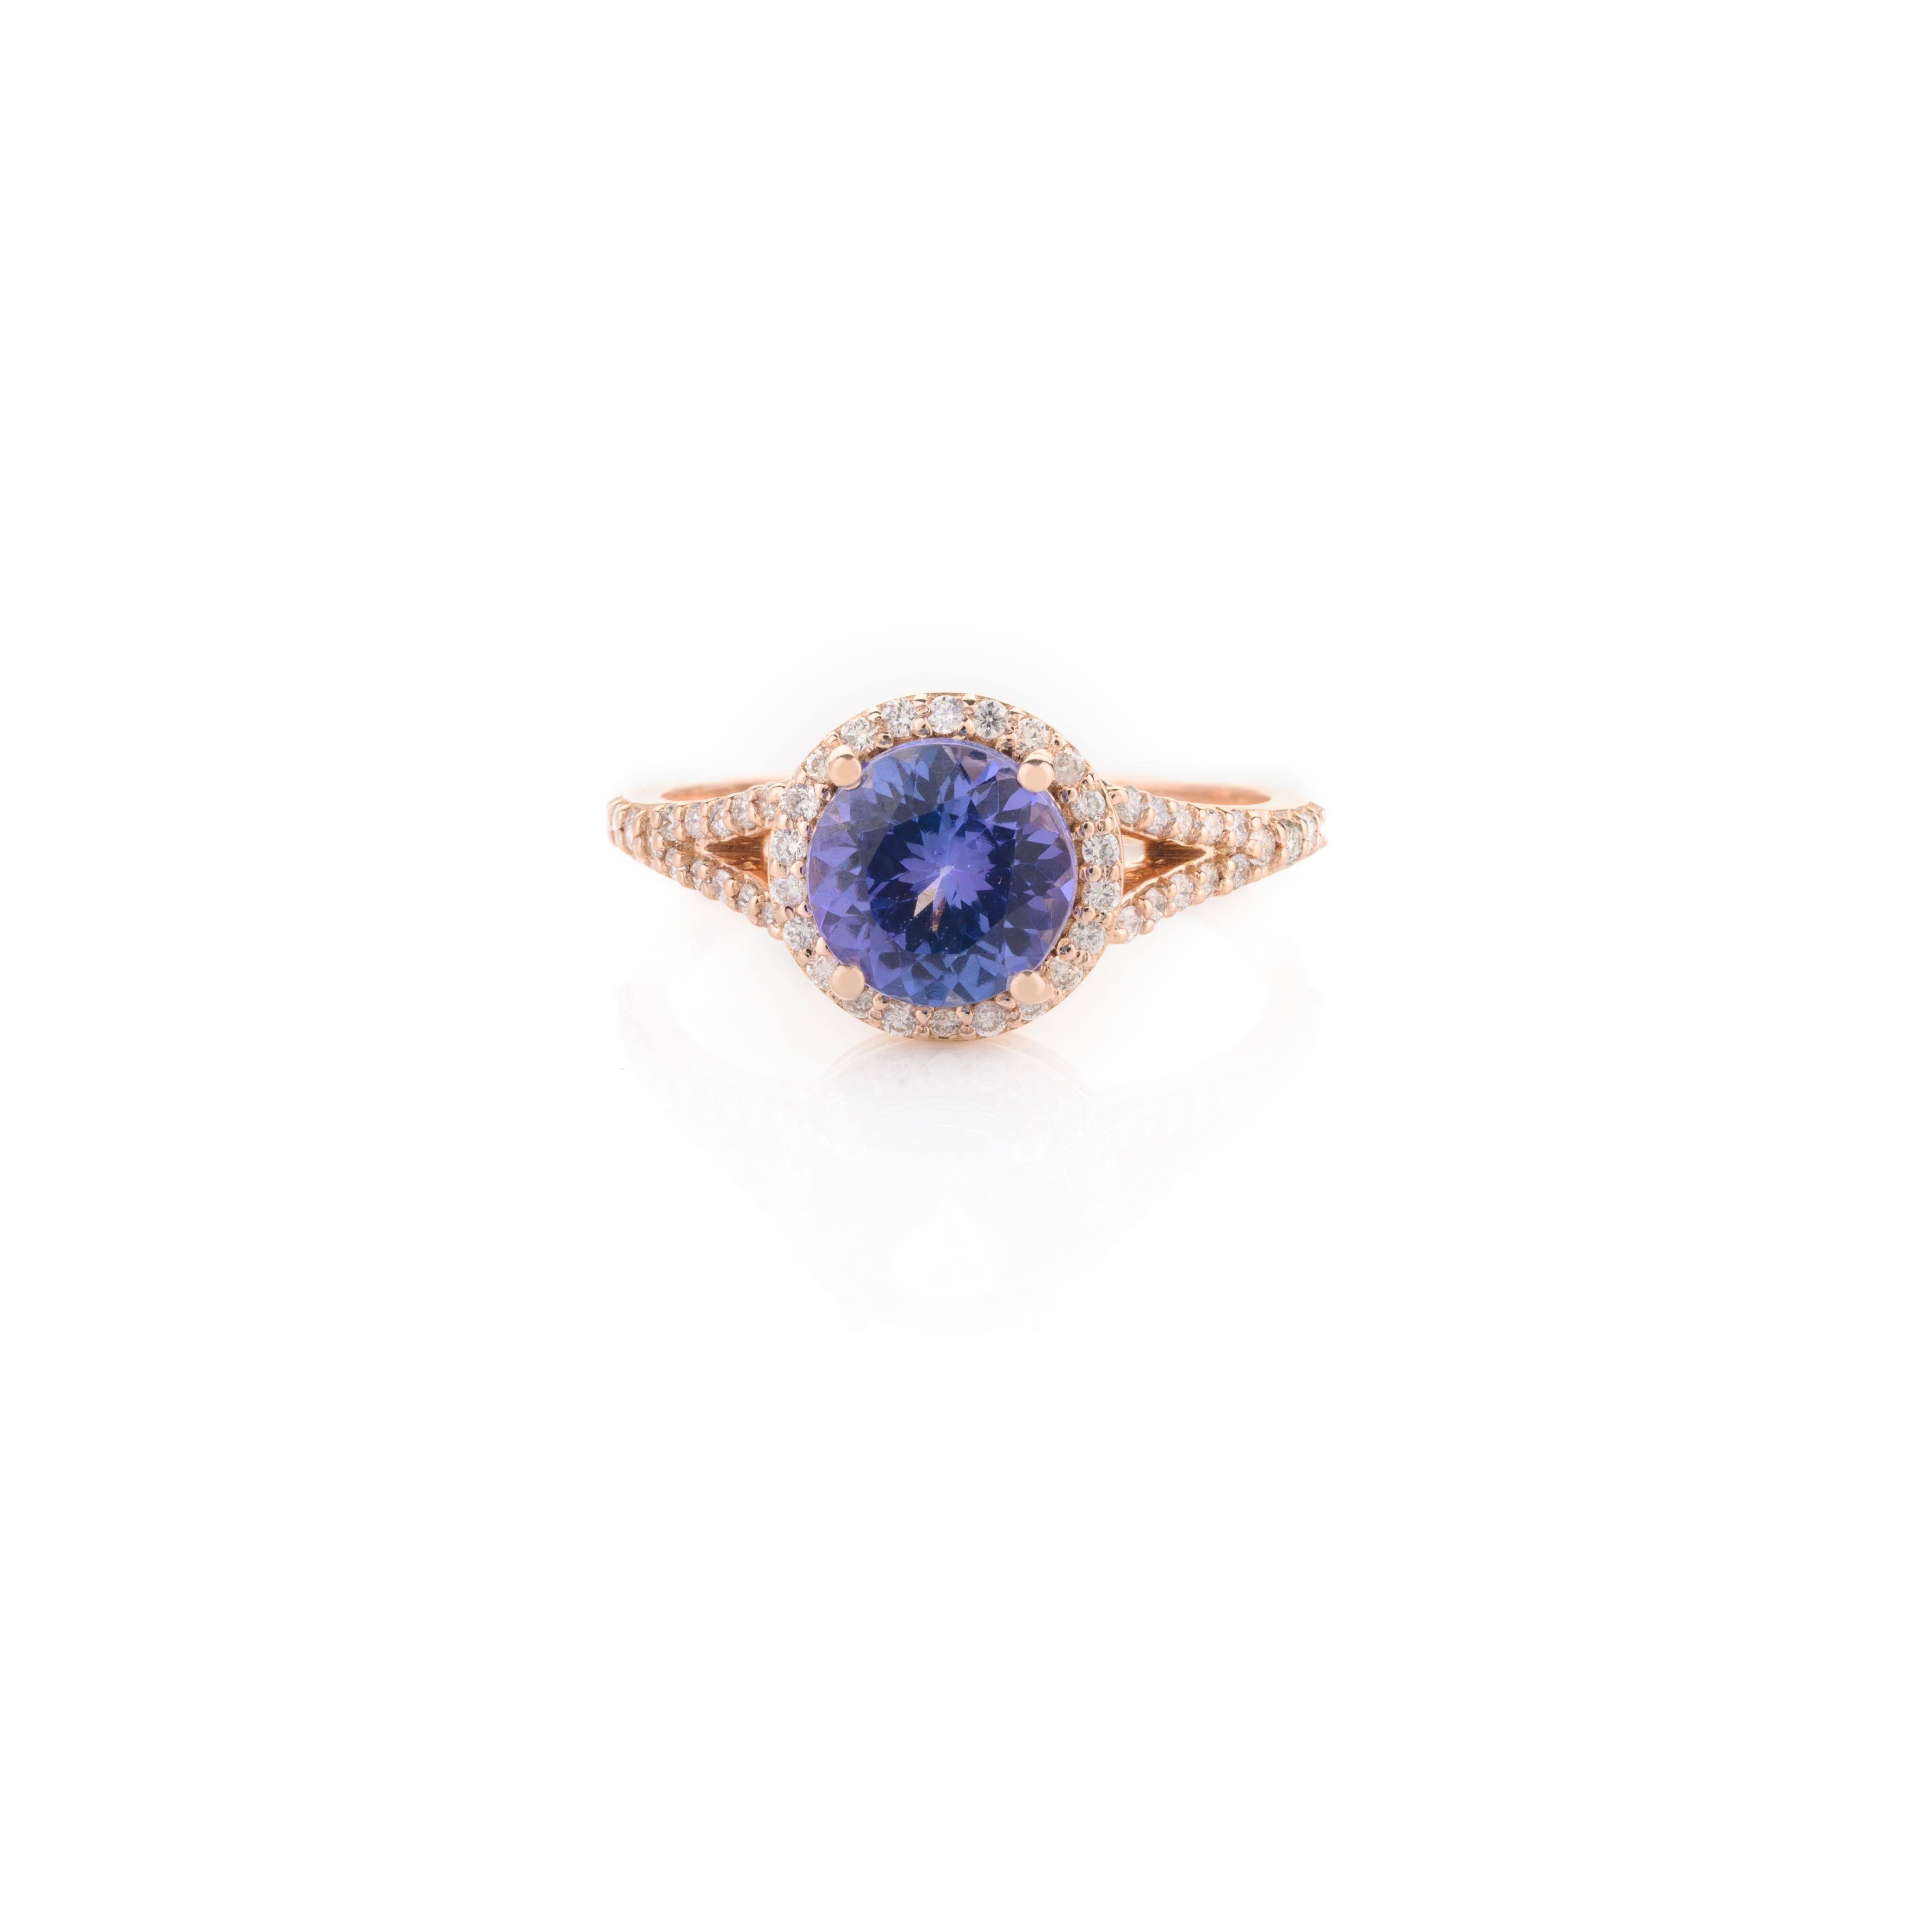 For Sale:  18k Solid Rose Gold Brilliant 1.47 CTW Tanzanite and Diamond Engagement Ring 8